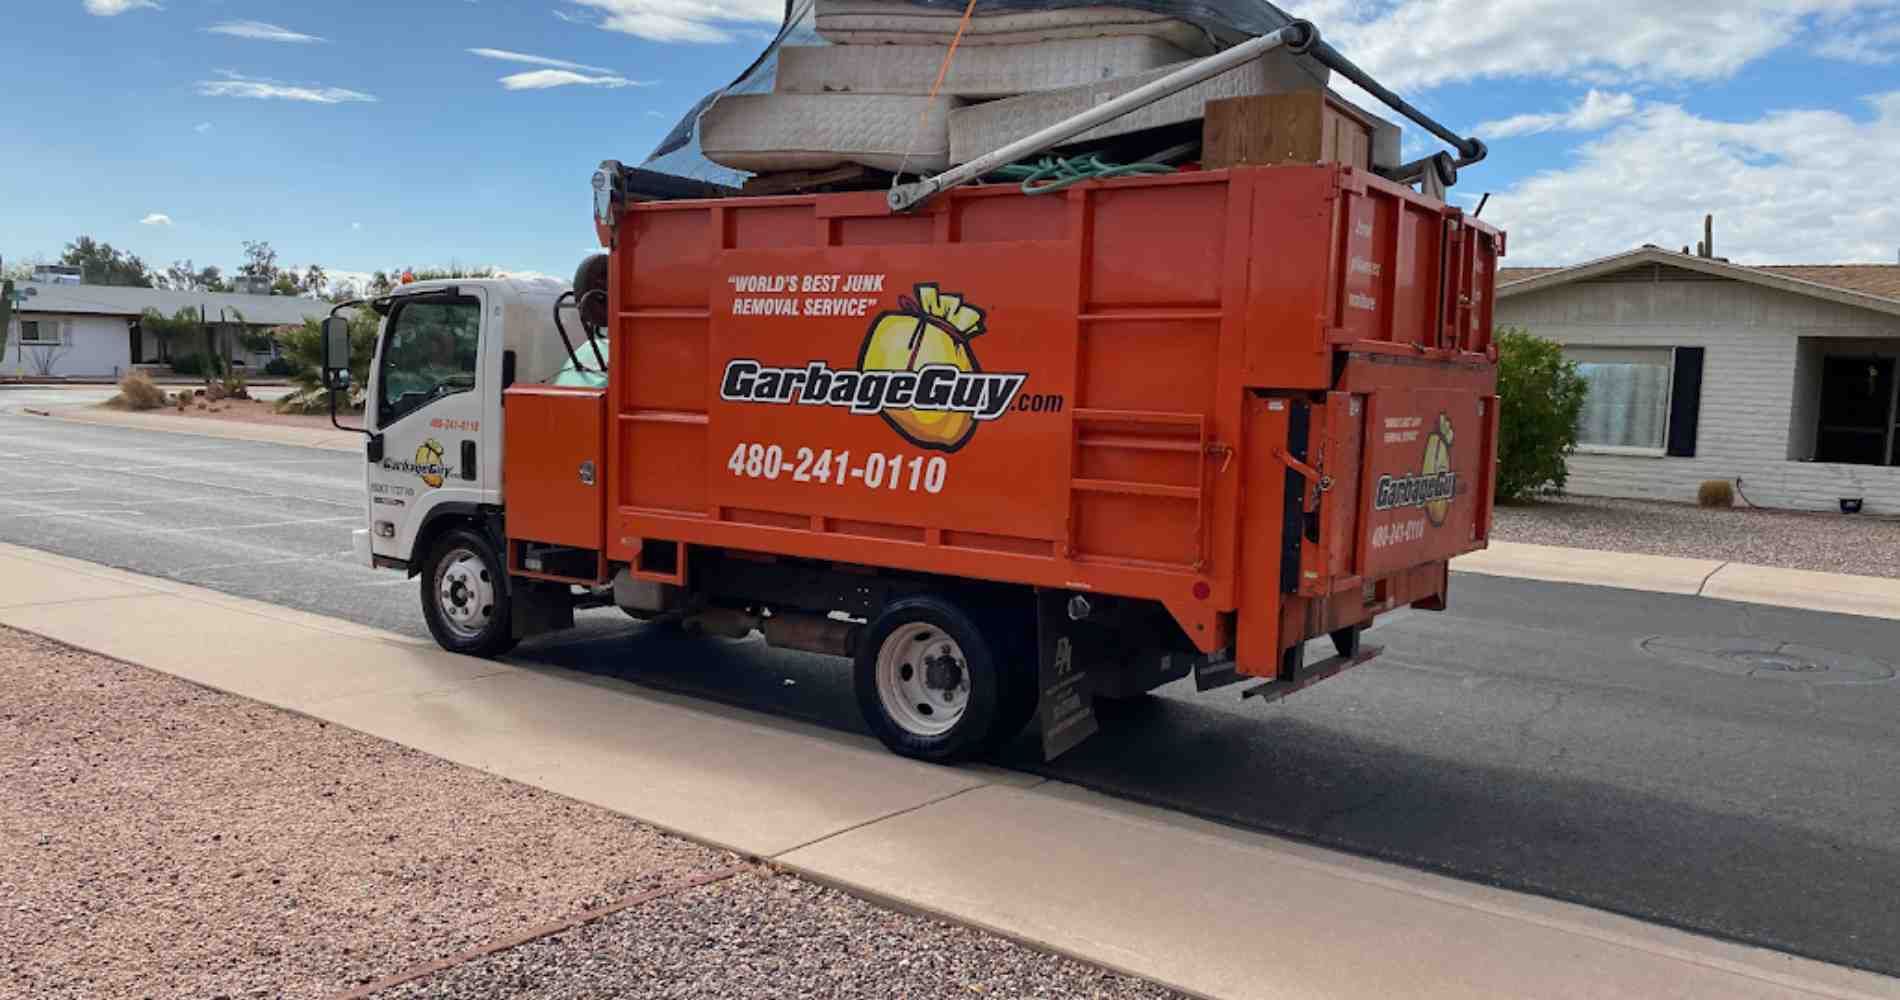 #1 for Curbside Trash Pickup in Queen Creek, AZ with Over 1200 5-Star Reviews!